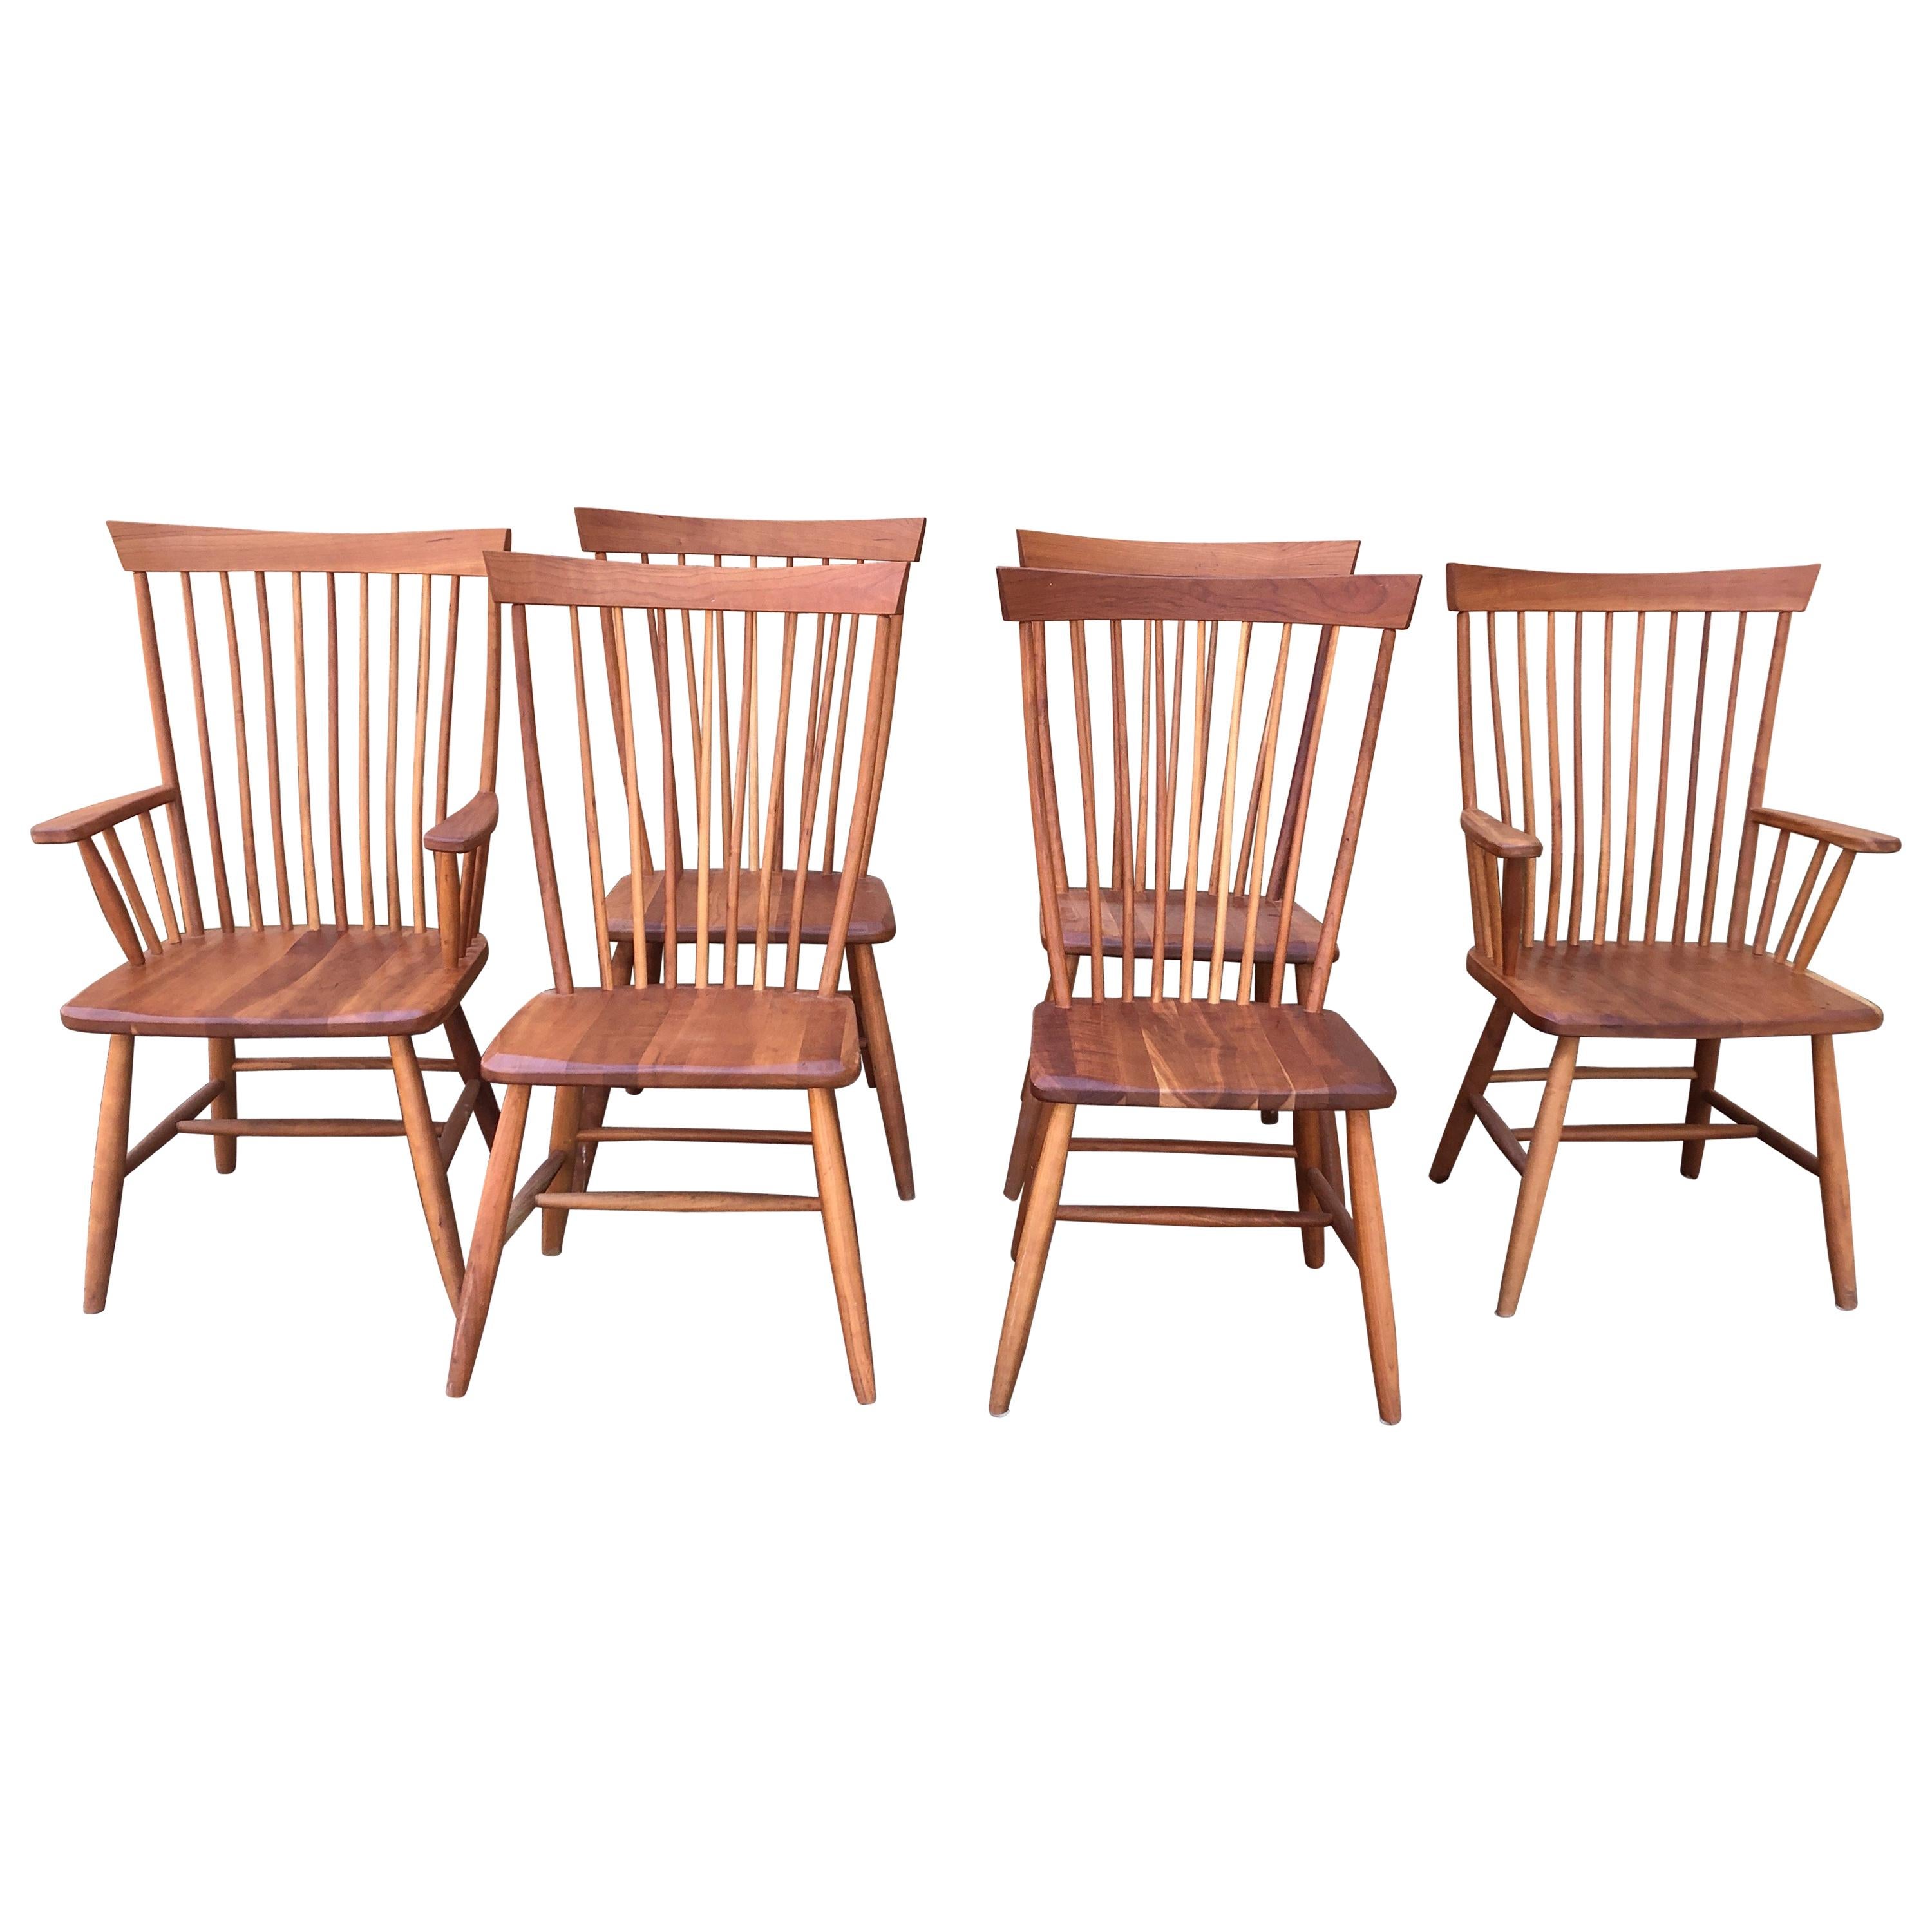 Set of 6 Amish Style Cherry Dining Chairs